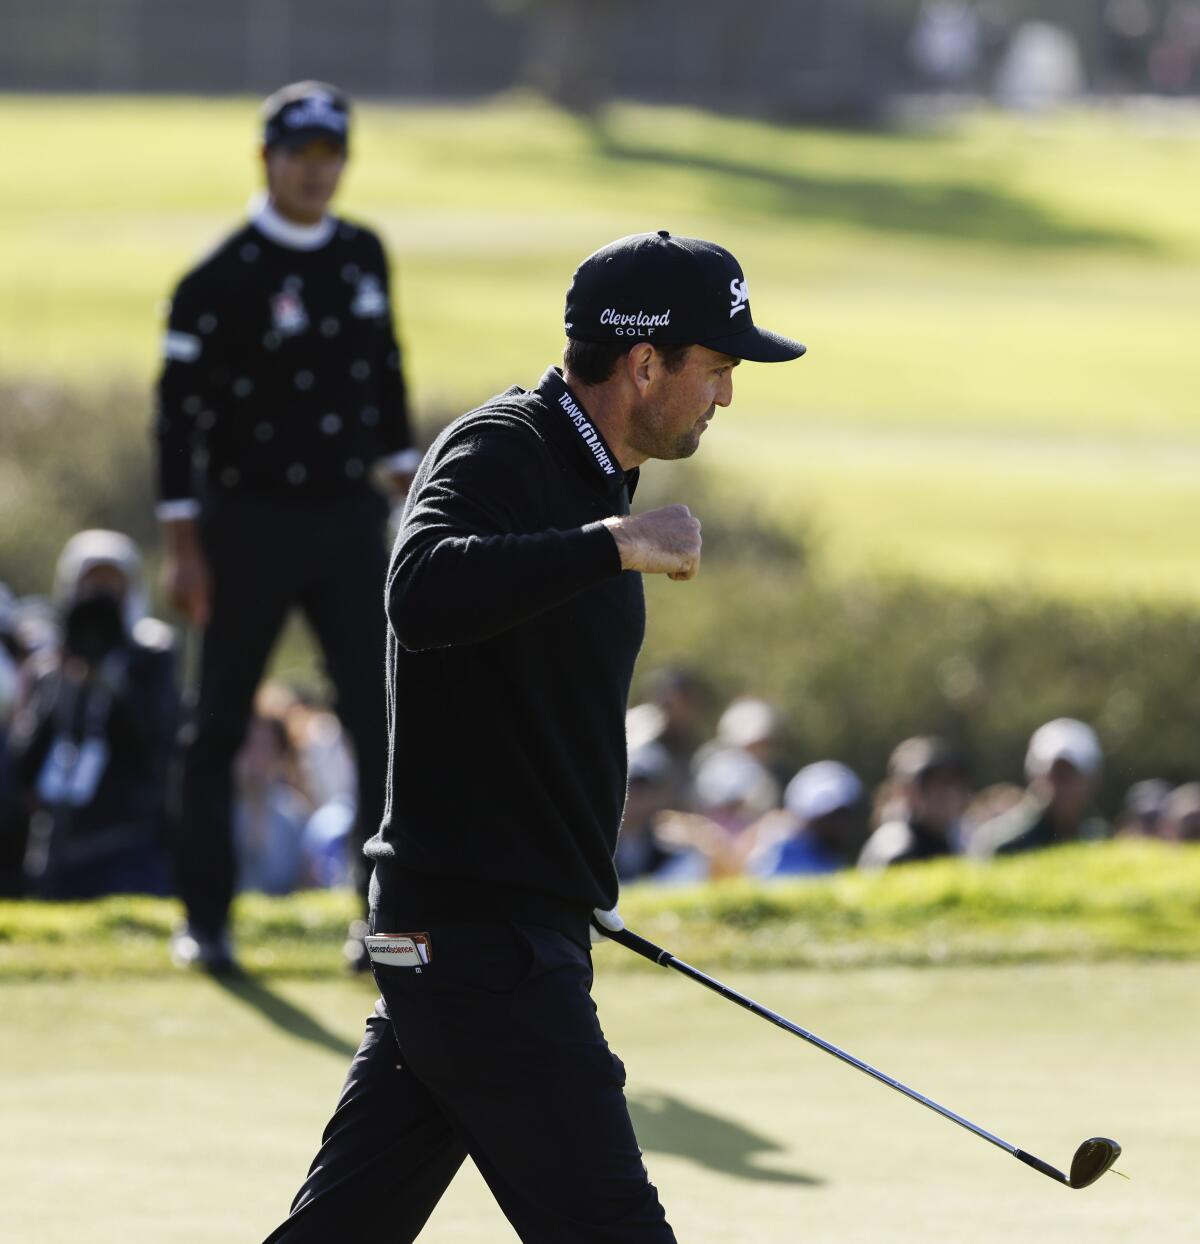 Keegan Bradley reacts after putting on the 13th hole during the final round of the Farmers Insurance Open on Jan. 28.